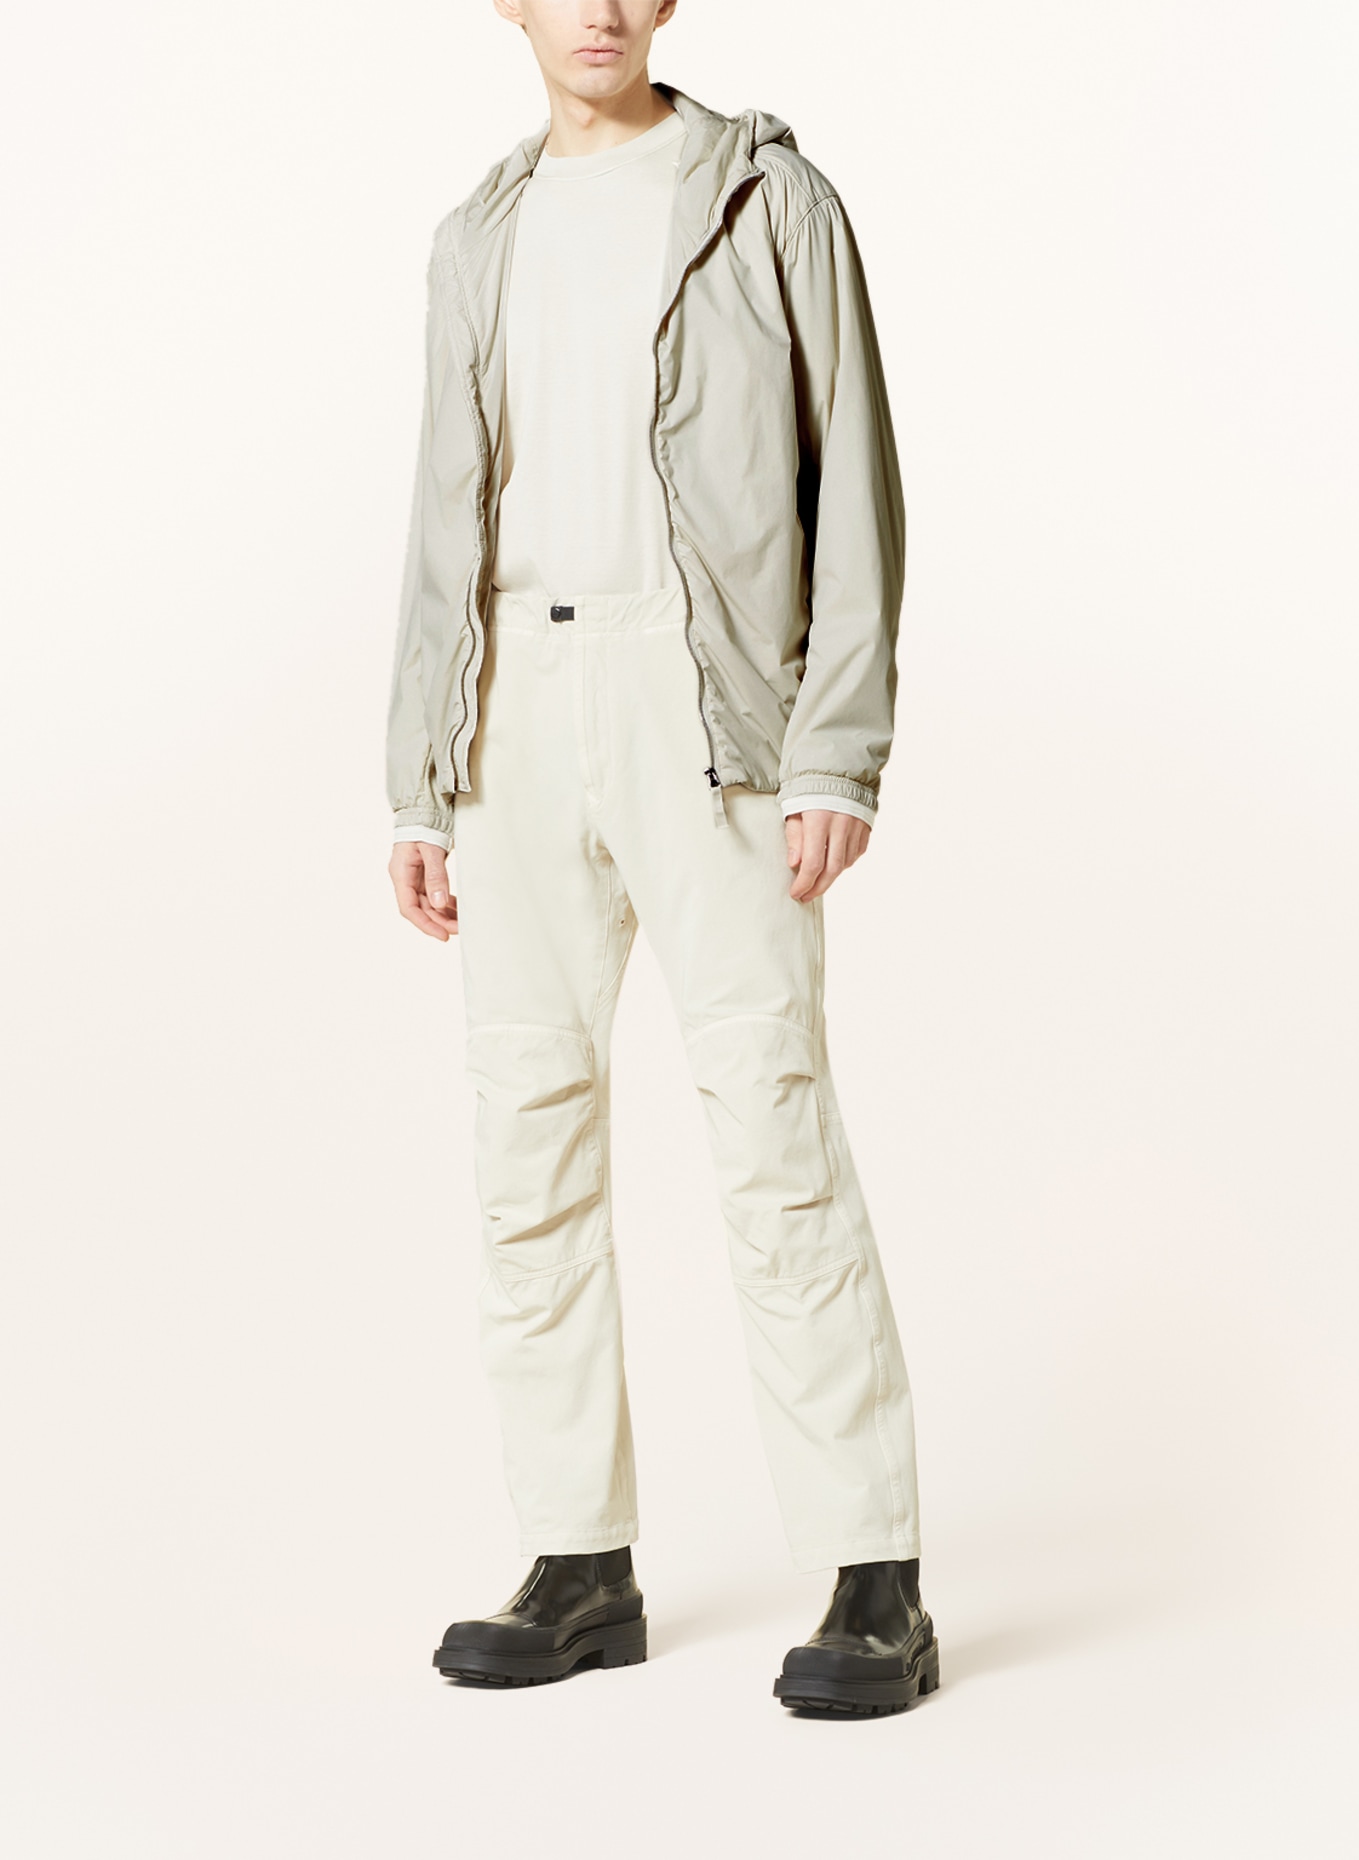 STONE ISLAND Jacket in mixed materials, Color: ECRU (Image 2)